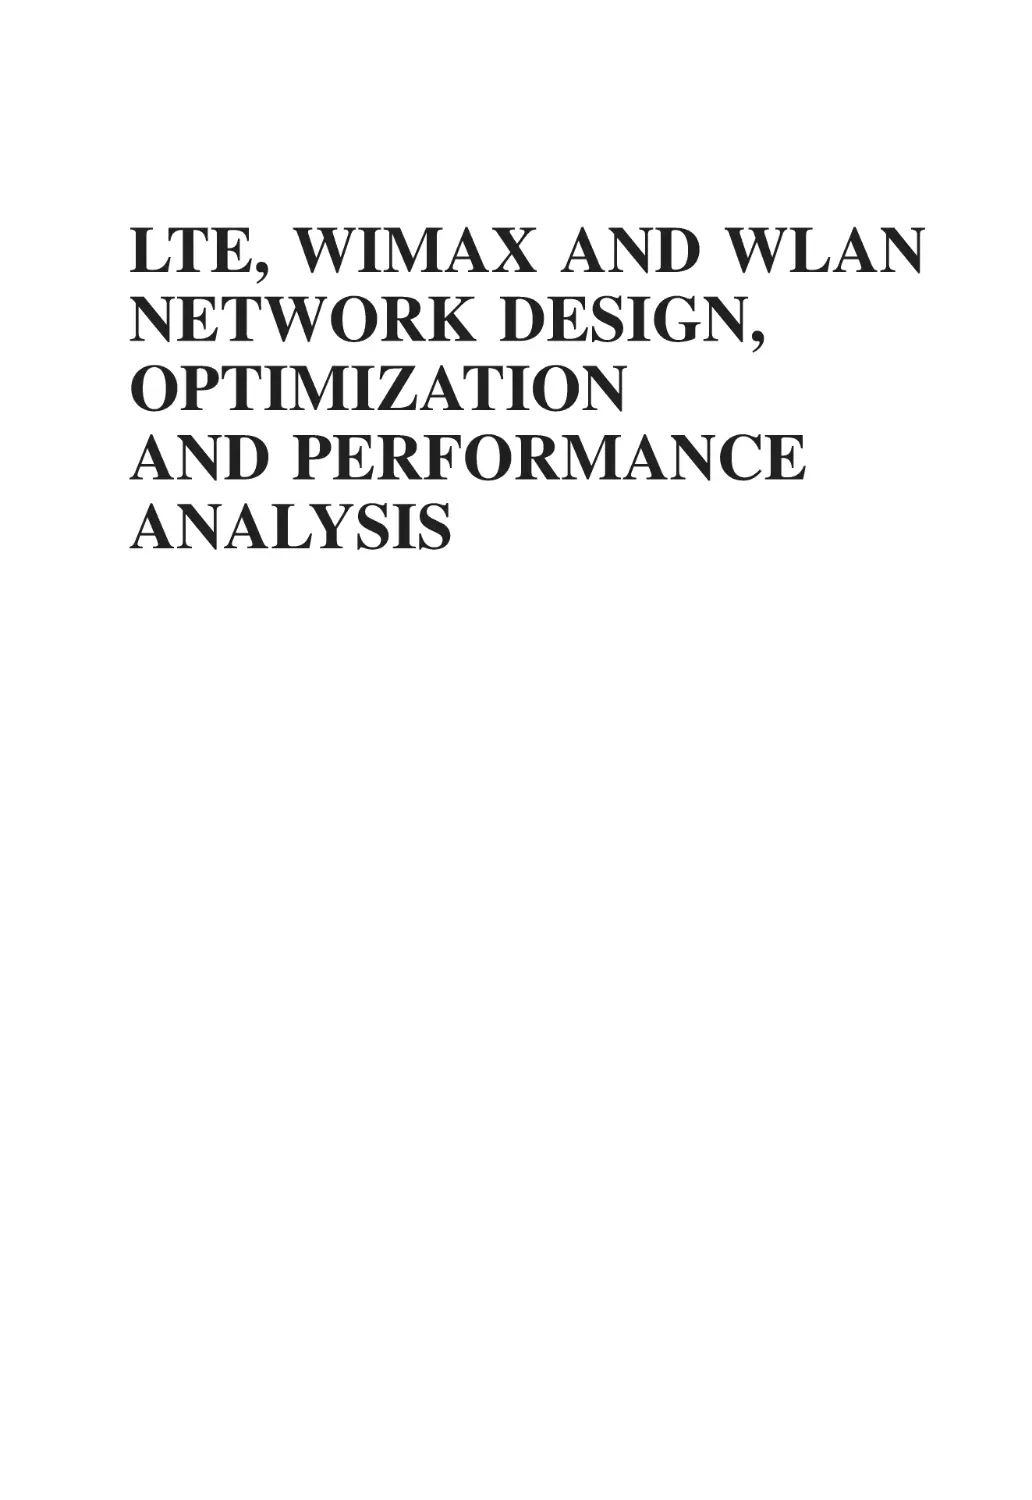 LTE, WIMAX and WLAN Network Design, Optimization and Performance Analysis
3.2.2 Packet-Switched Traffic Characterization